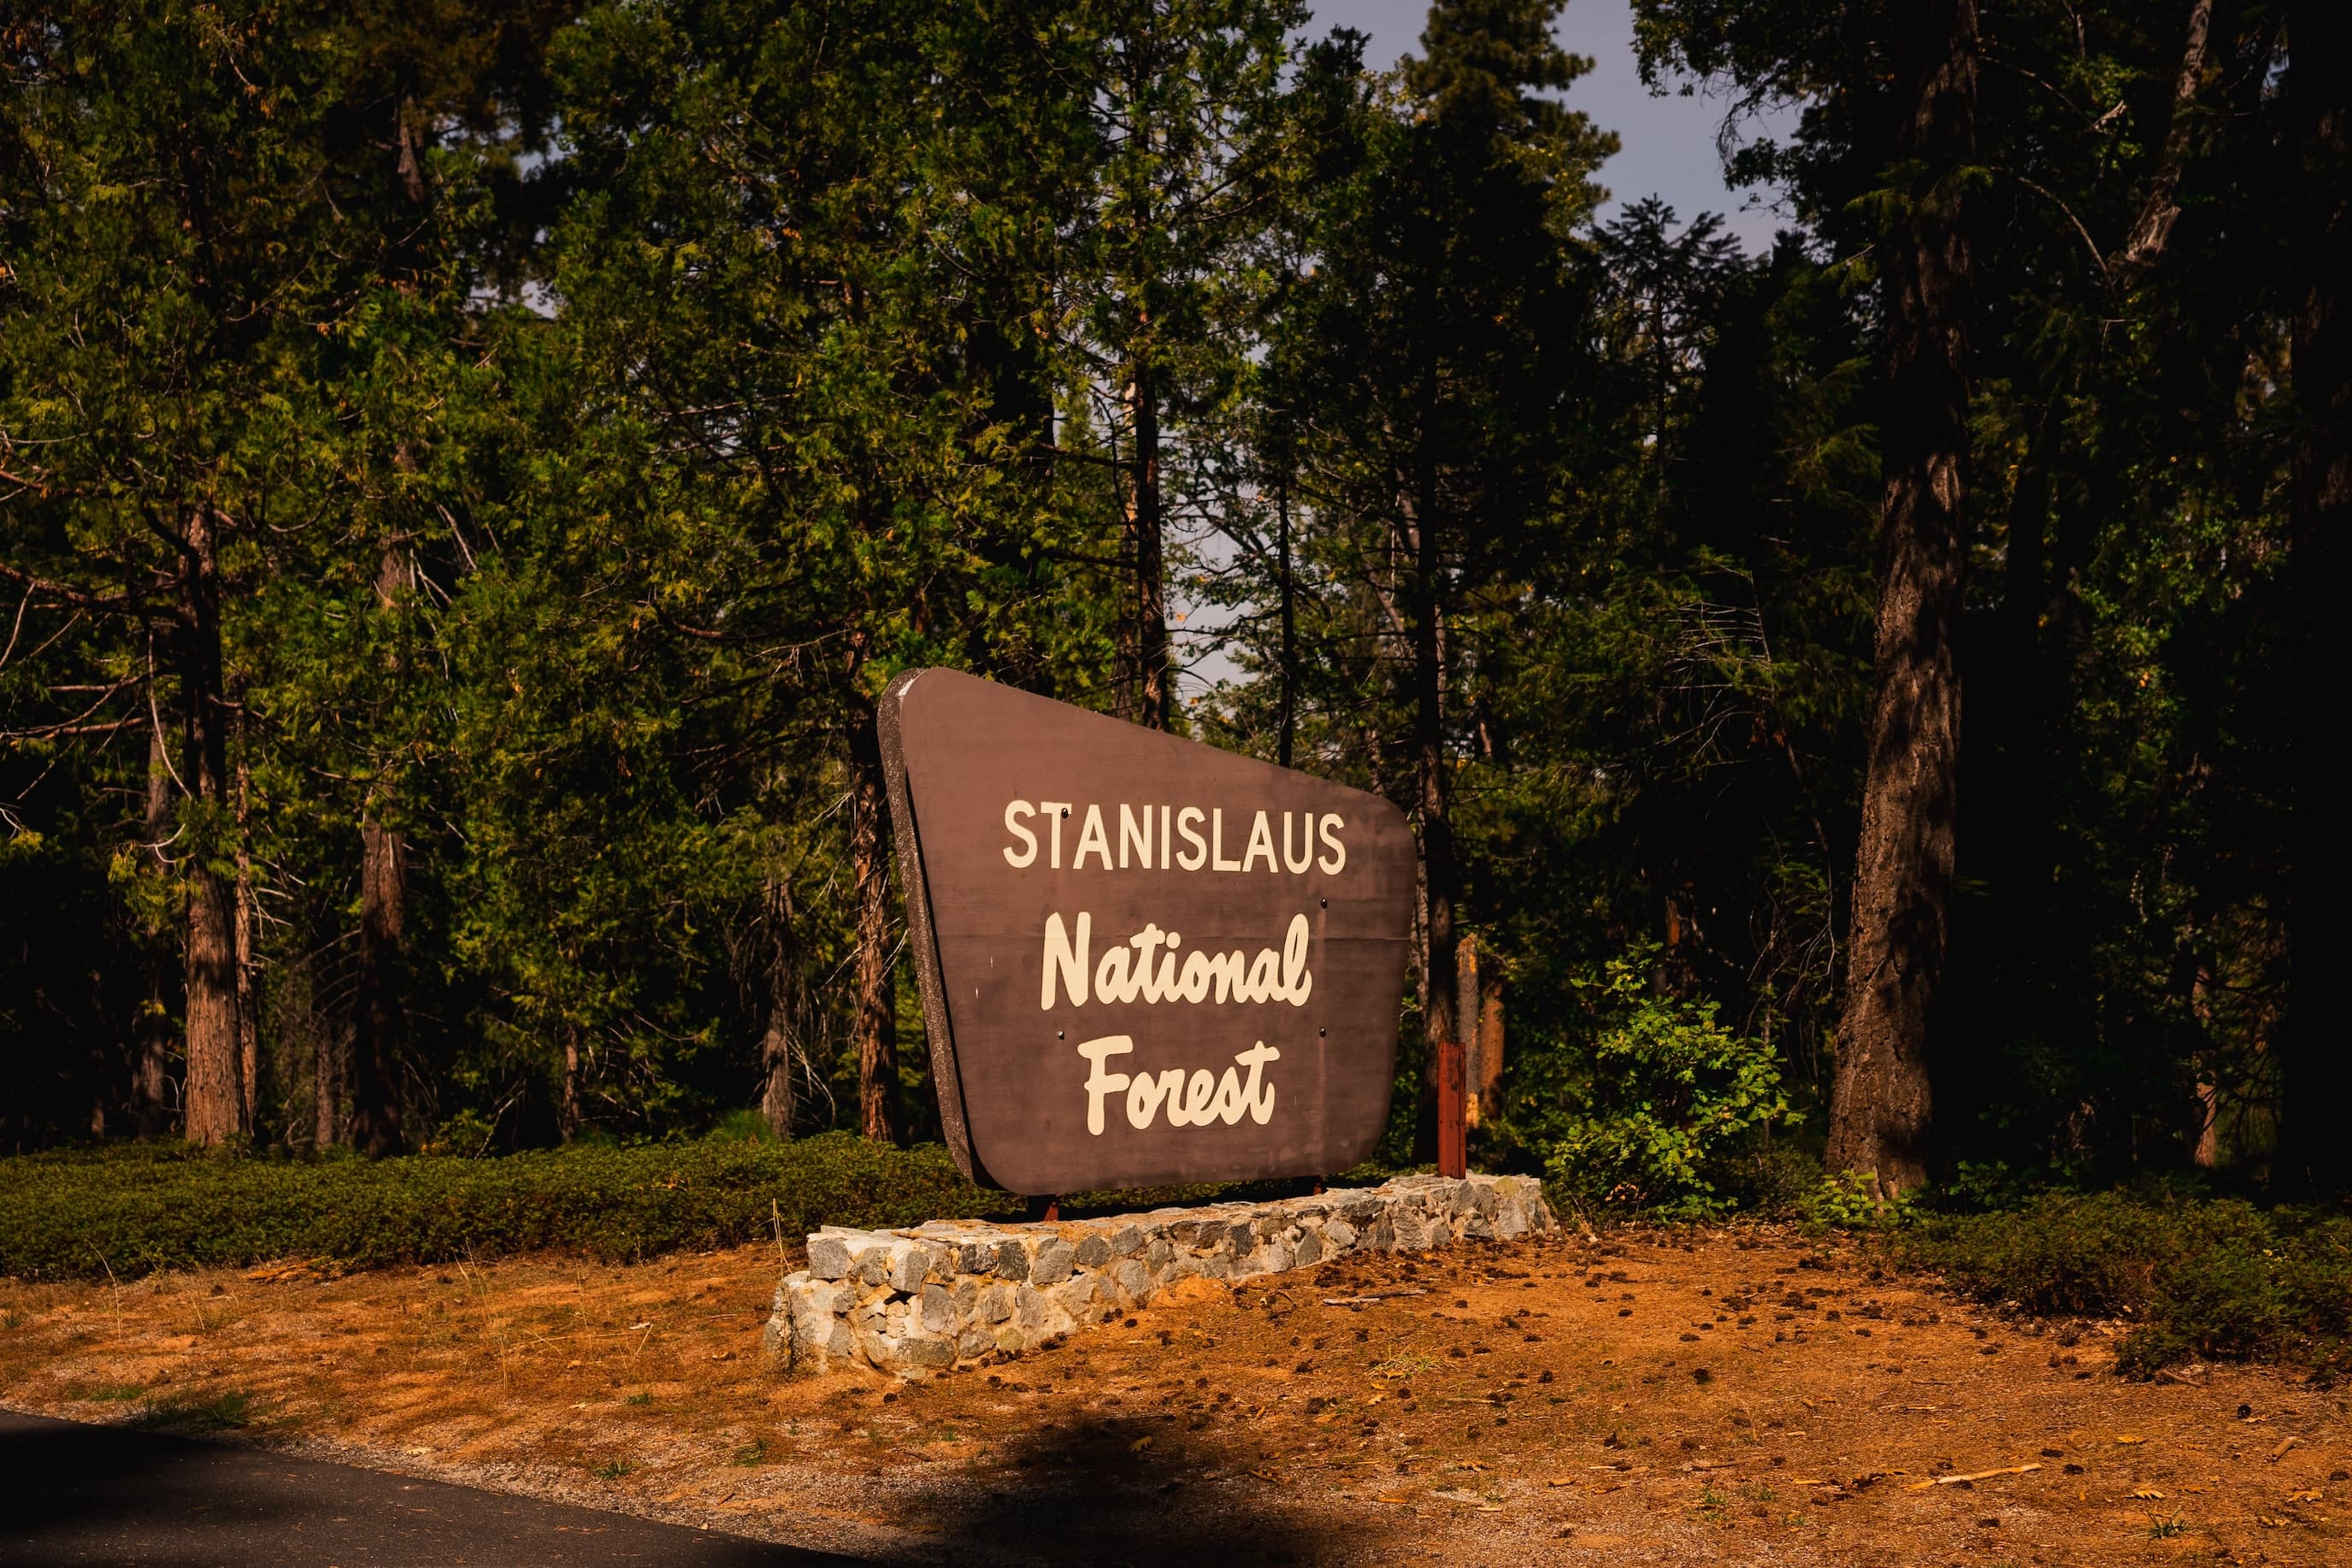 The entrance sign of Stanislaus National Forest mounted on a stone base beside a road, surrounded by lush green pine trees.